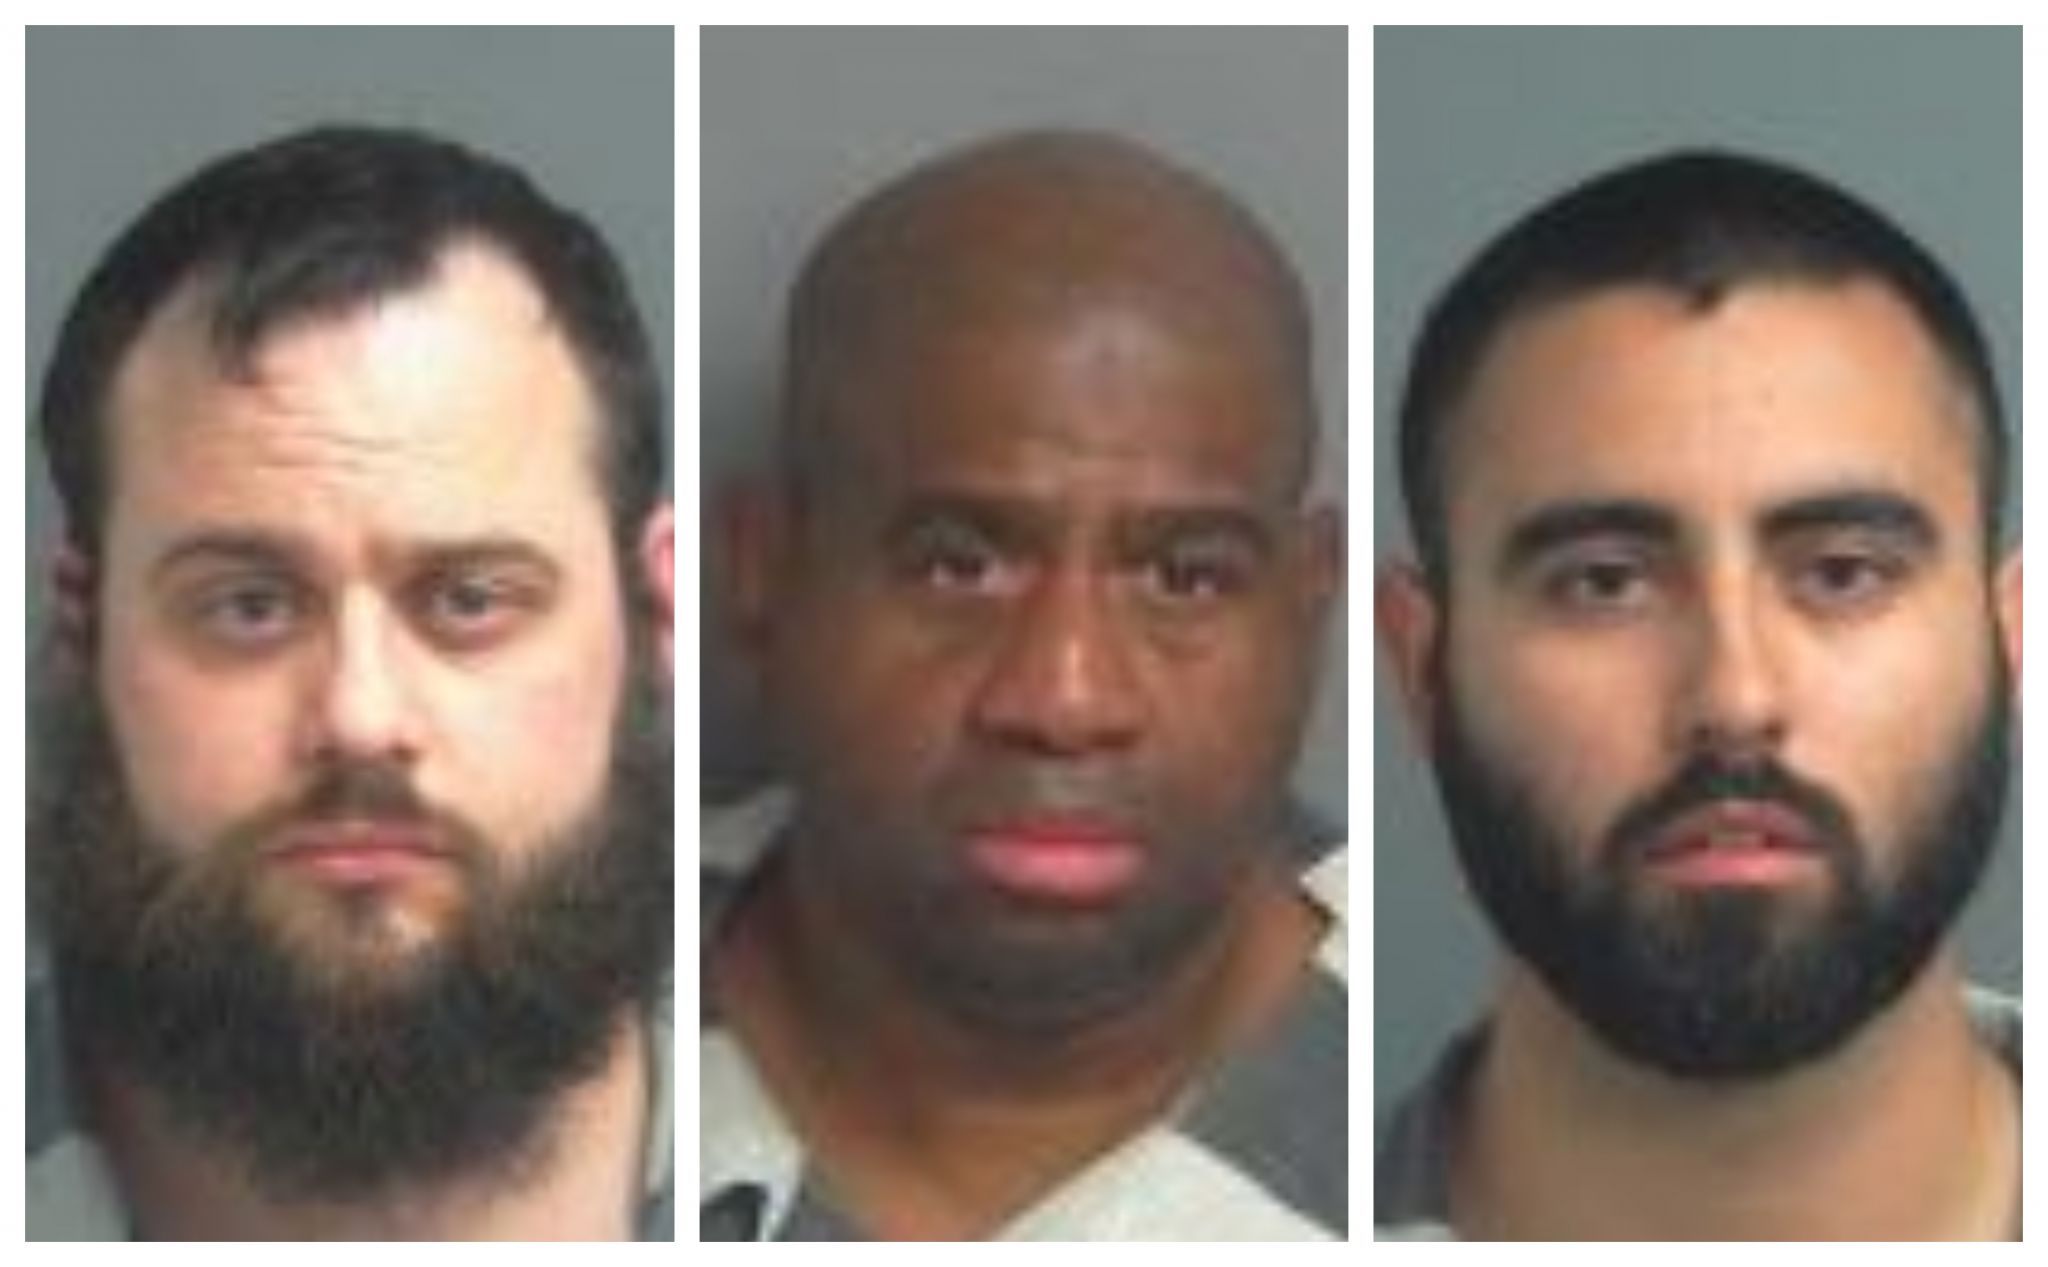 Montgomery County Lead Sting Nabs 8 Allegedly Seeking Prostitutes Online 